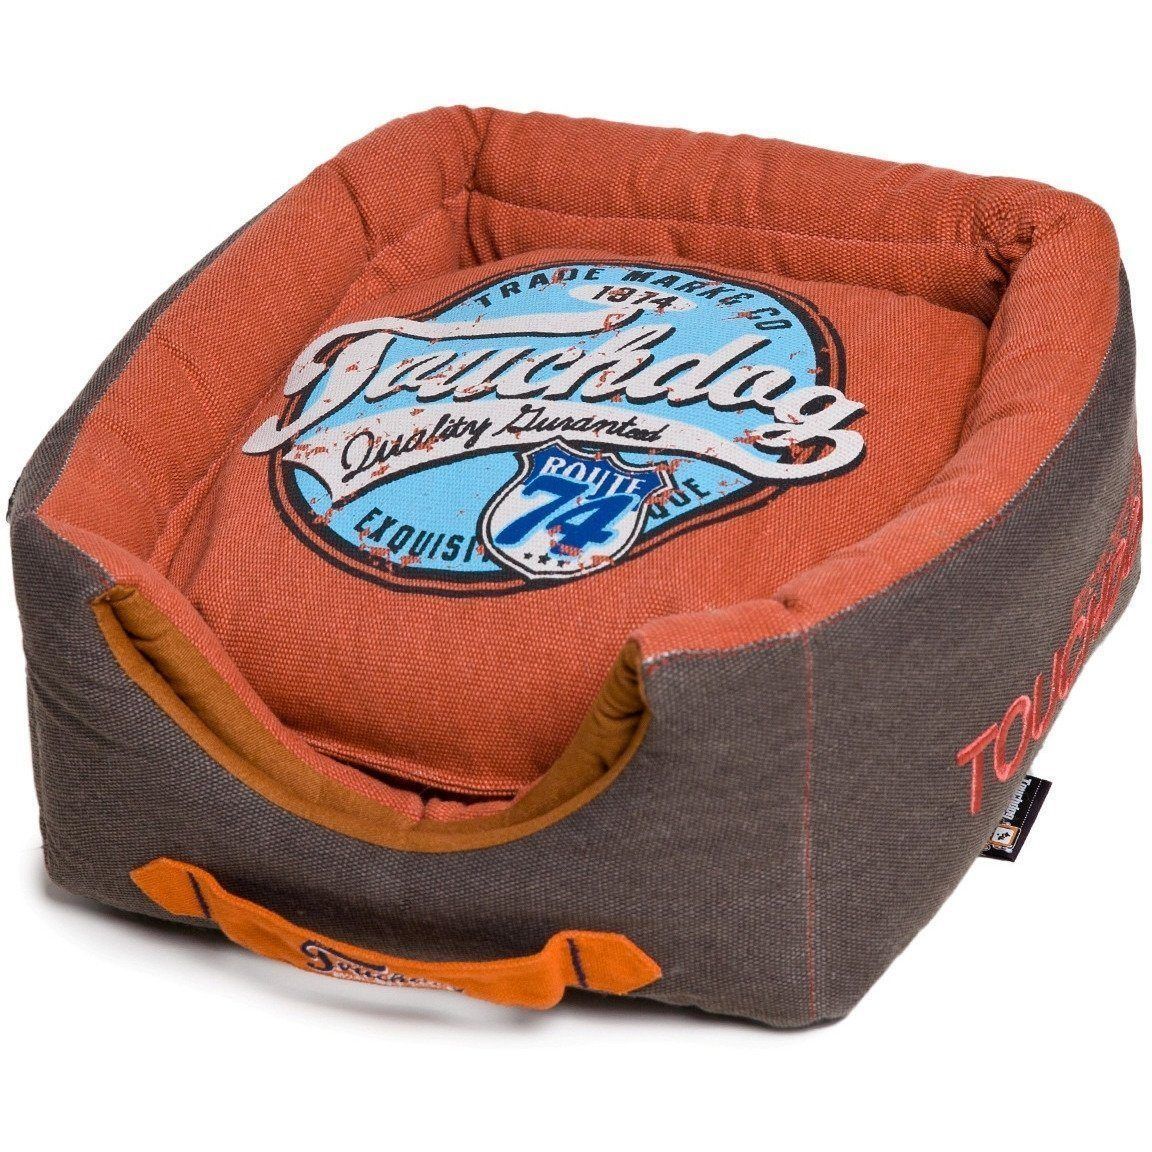 Touchdog ® 'Vintage Squared' 2-in-1 Convertible and Collapsible Dog and Cat Bed Grenadine, Dark Brown 